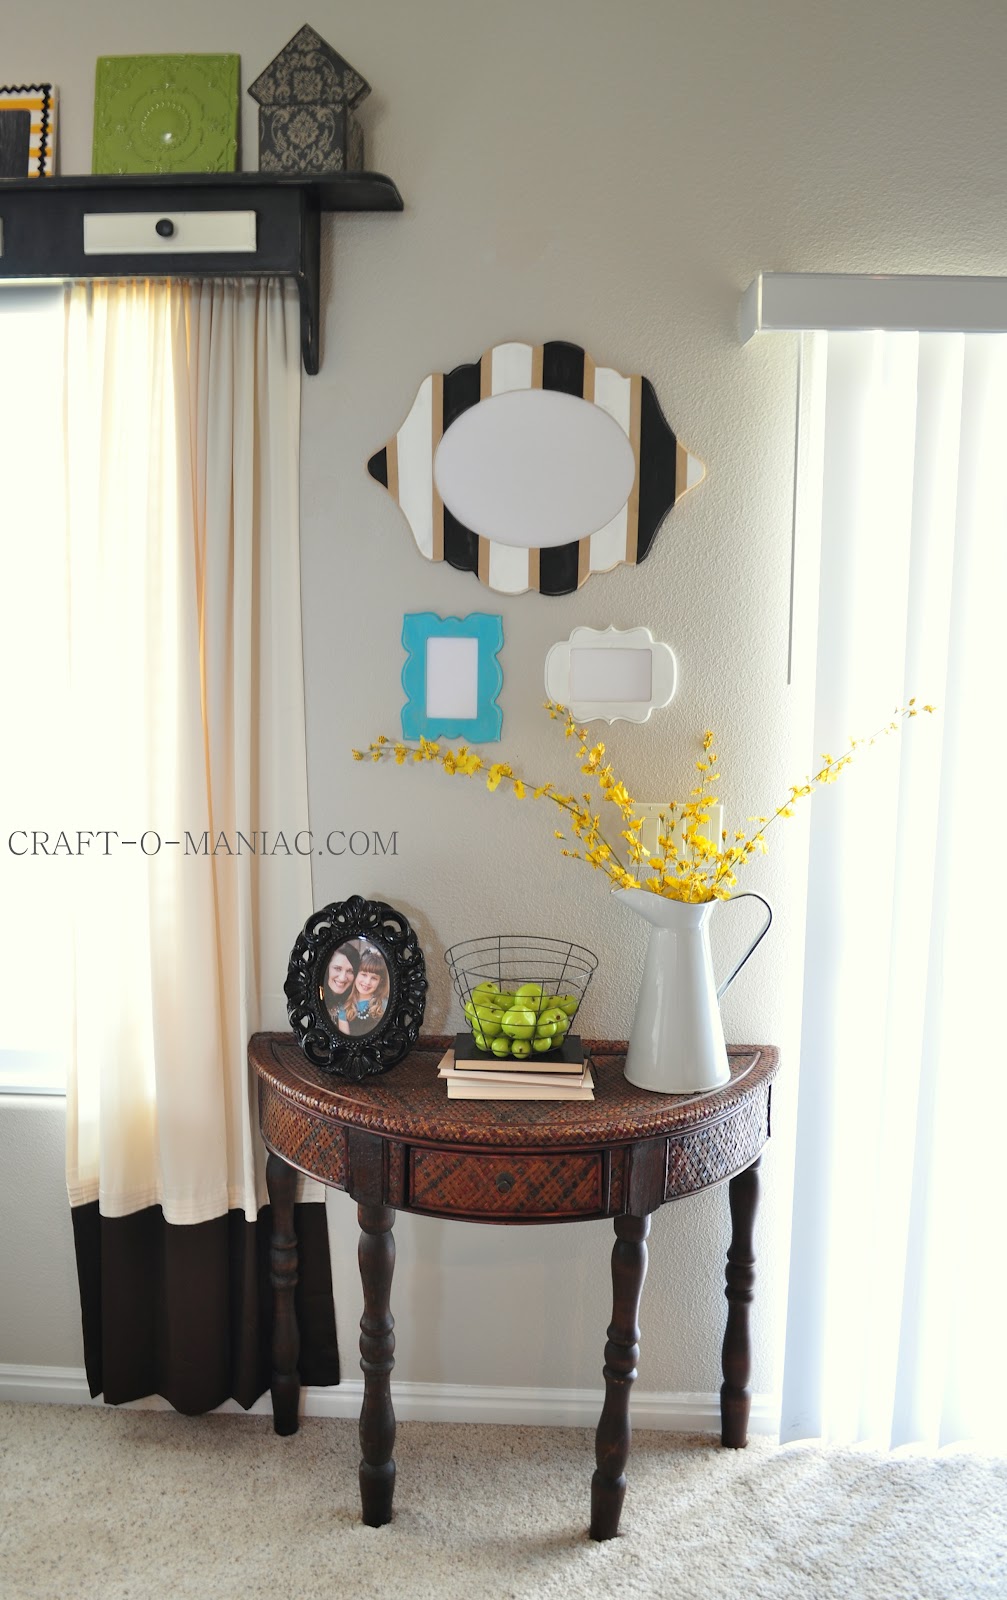  Home  Decor  Gallery  Wall  with Table Craft O Maniac